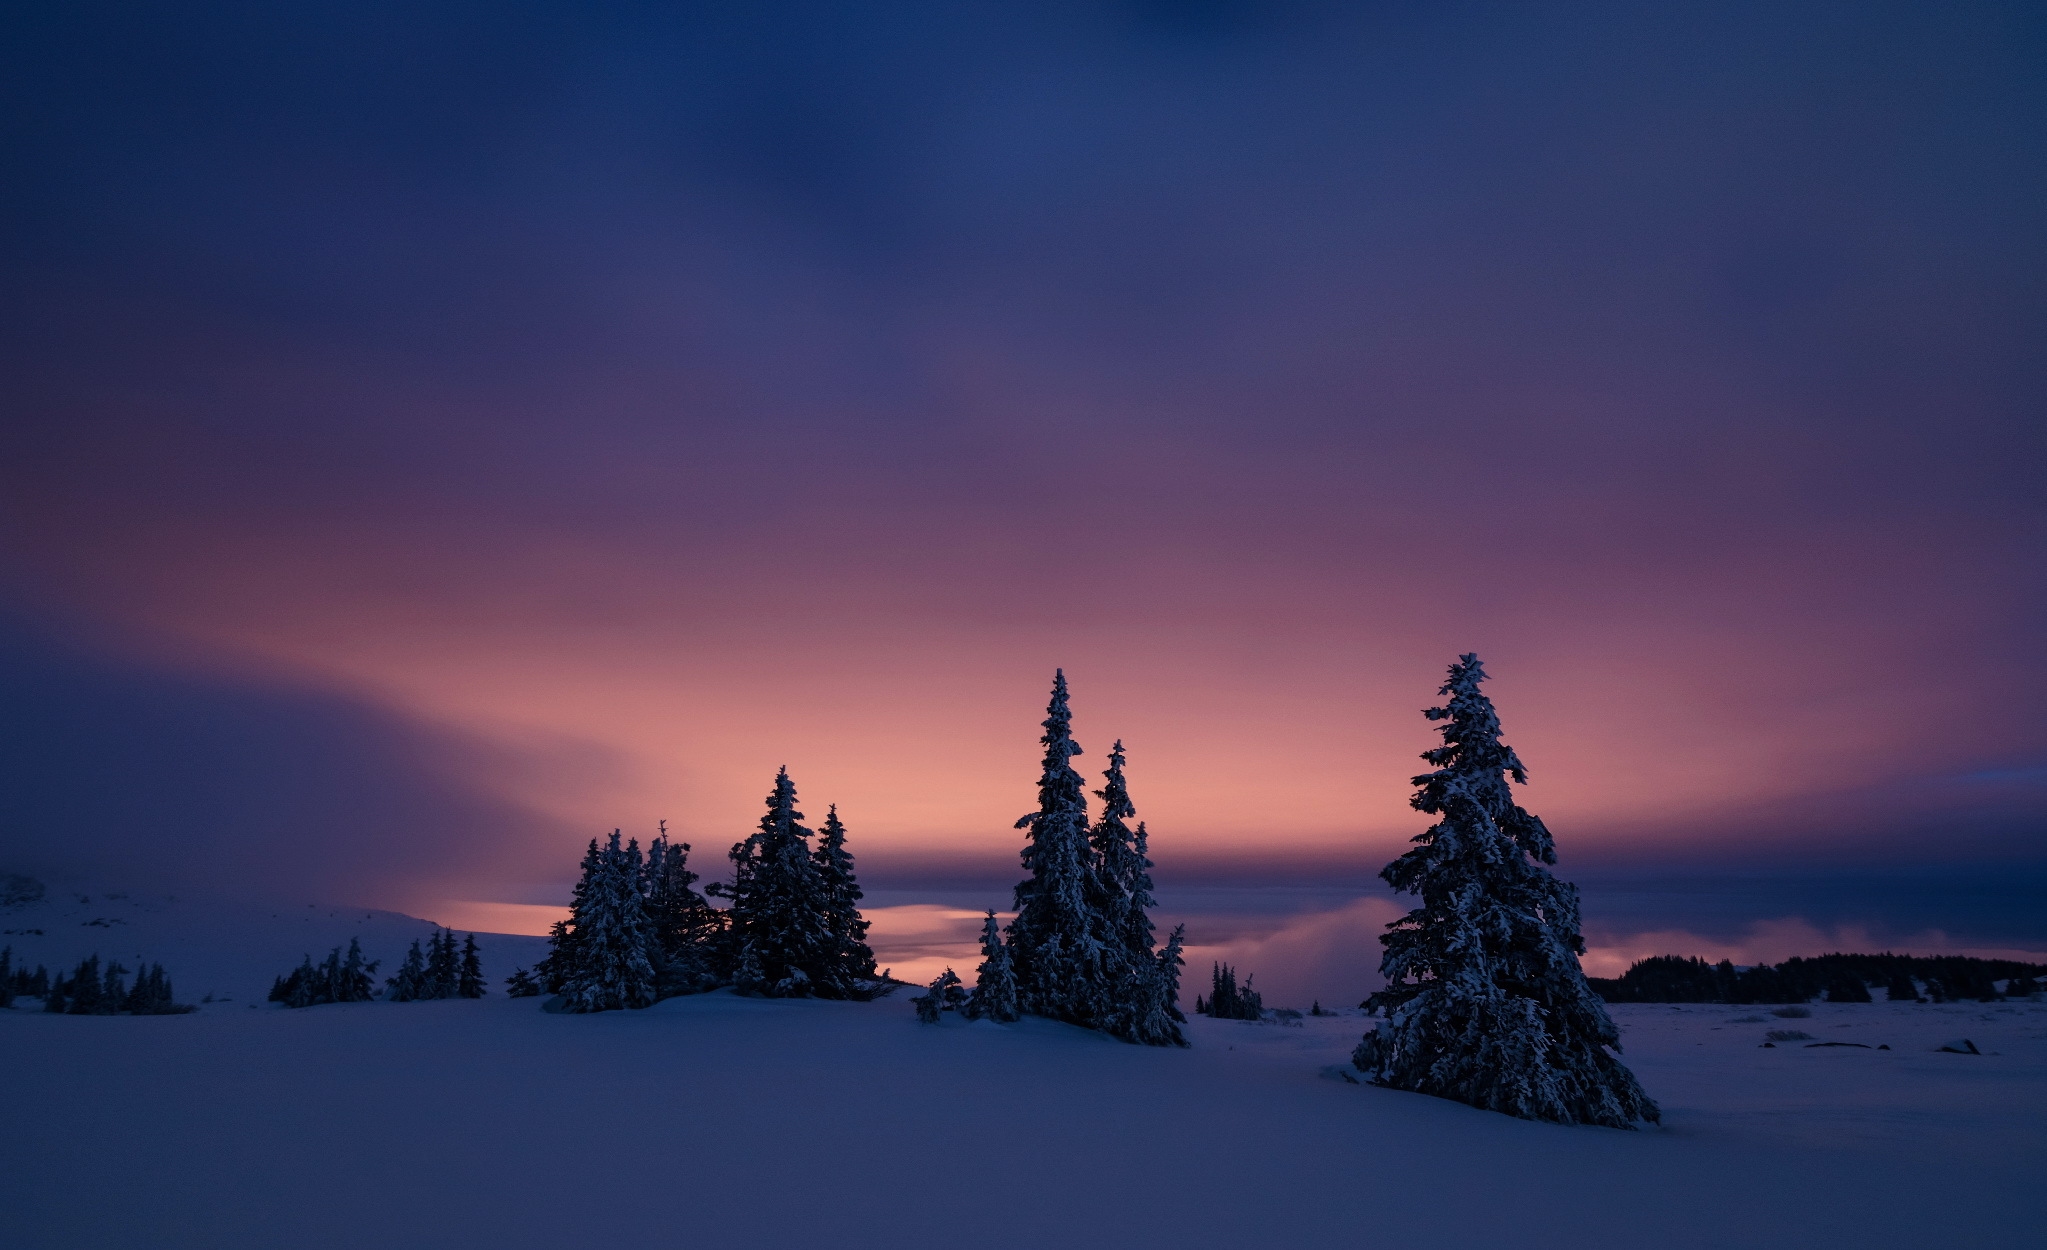 Late sunset on a winter field with fir trees wrapped in snow